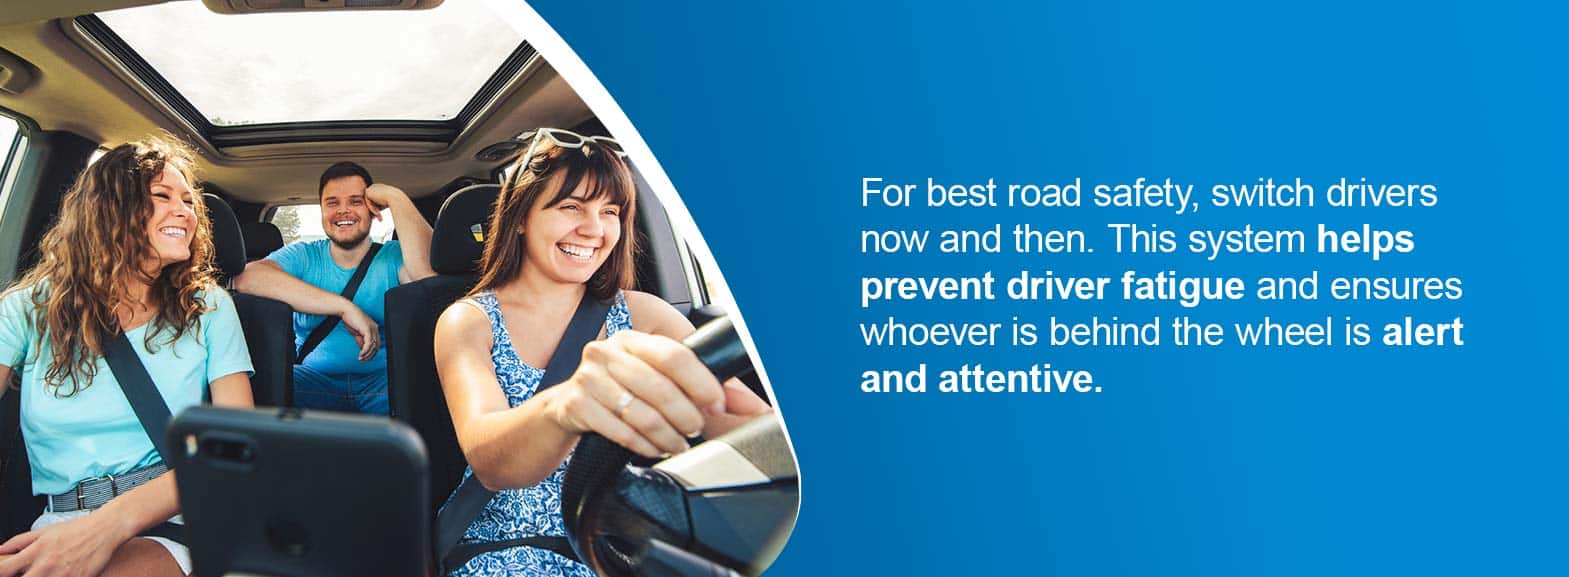 For best road safety, switch drivers now and then. This system helps prevent driver fatigue and ensures whoever is behind the wheel is alert and attentive.